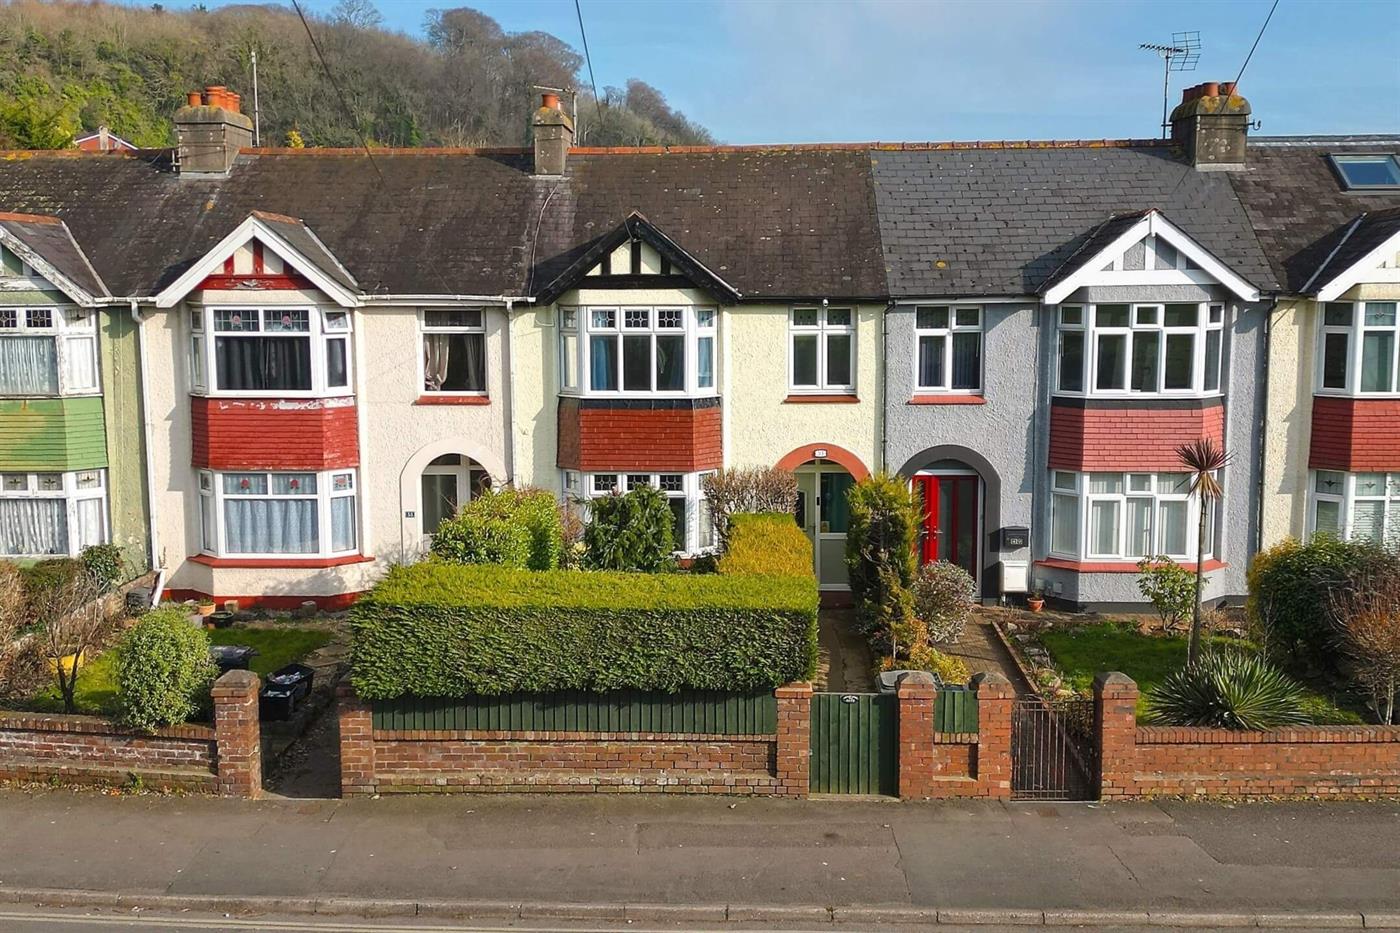 3 Bedroom Terraced House for Sale: Kings Ash Road, Paignton, TQ3 3TY